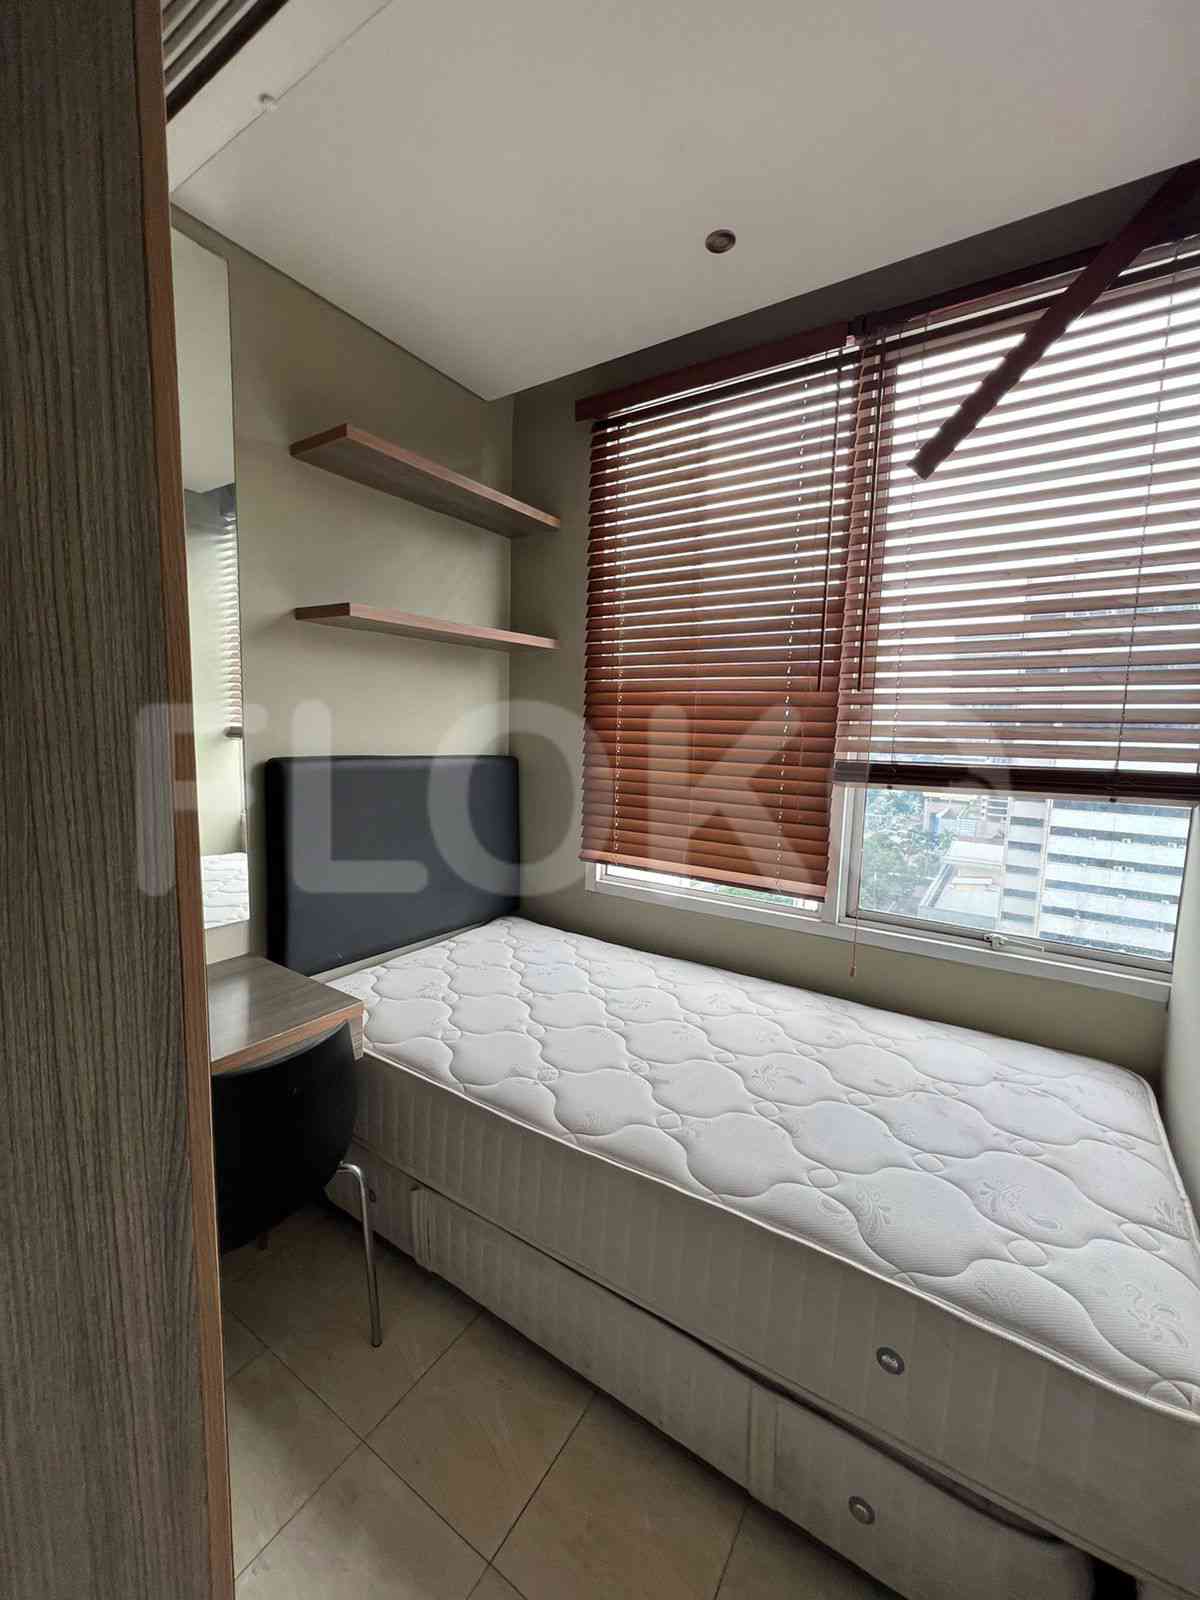 2 Bedroom on 16th Floor for Rent in FX Residence - fsud97 5